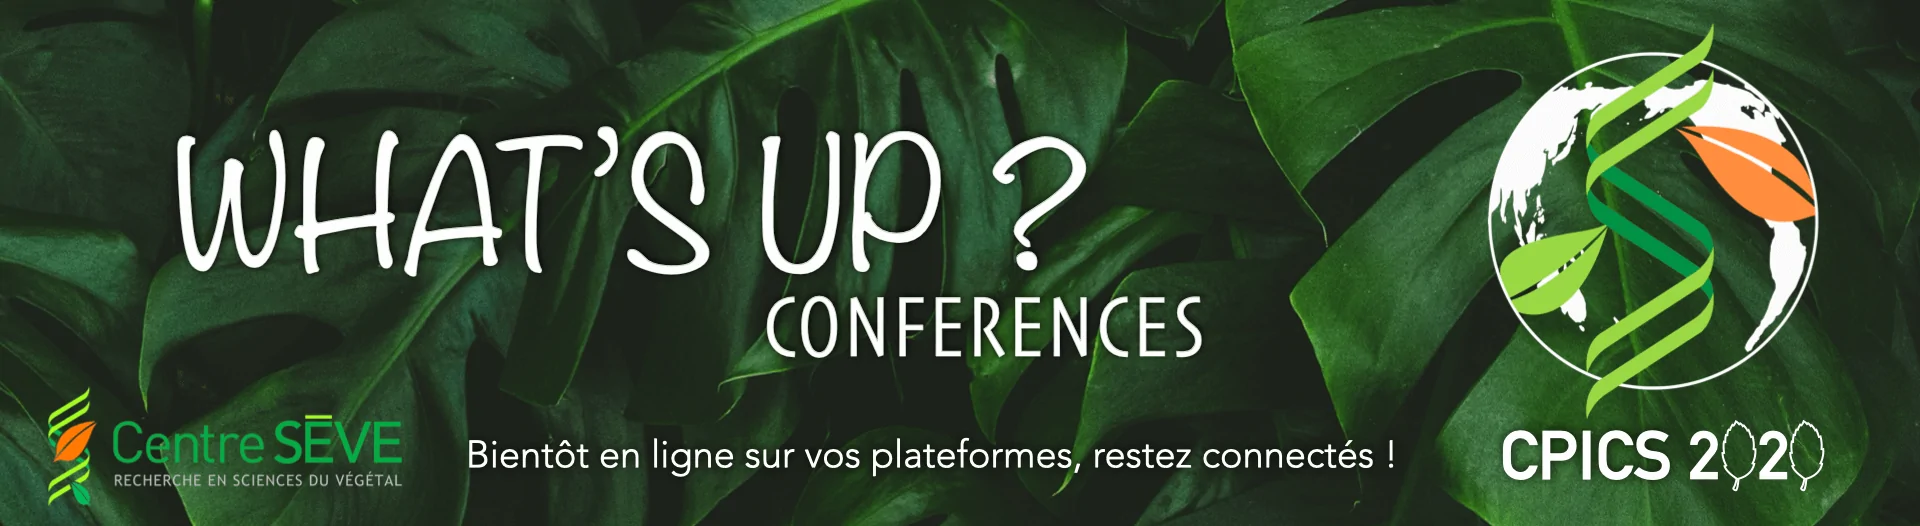 Banner for What's up? Conferences